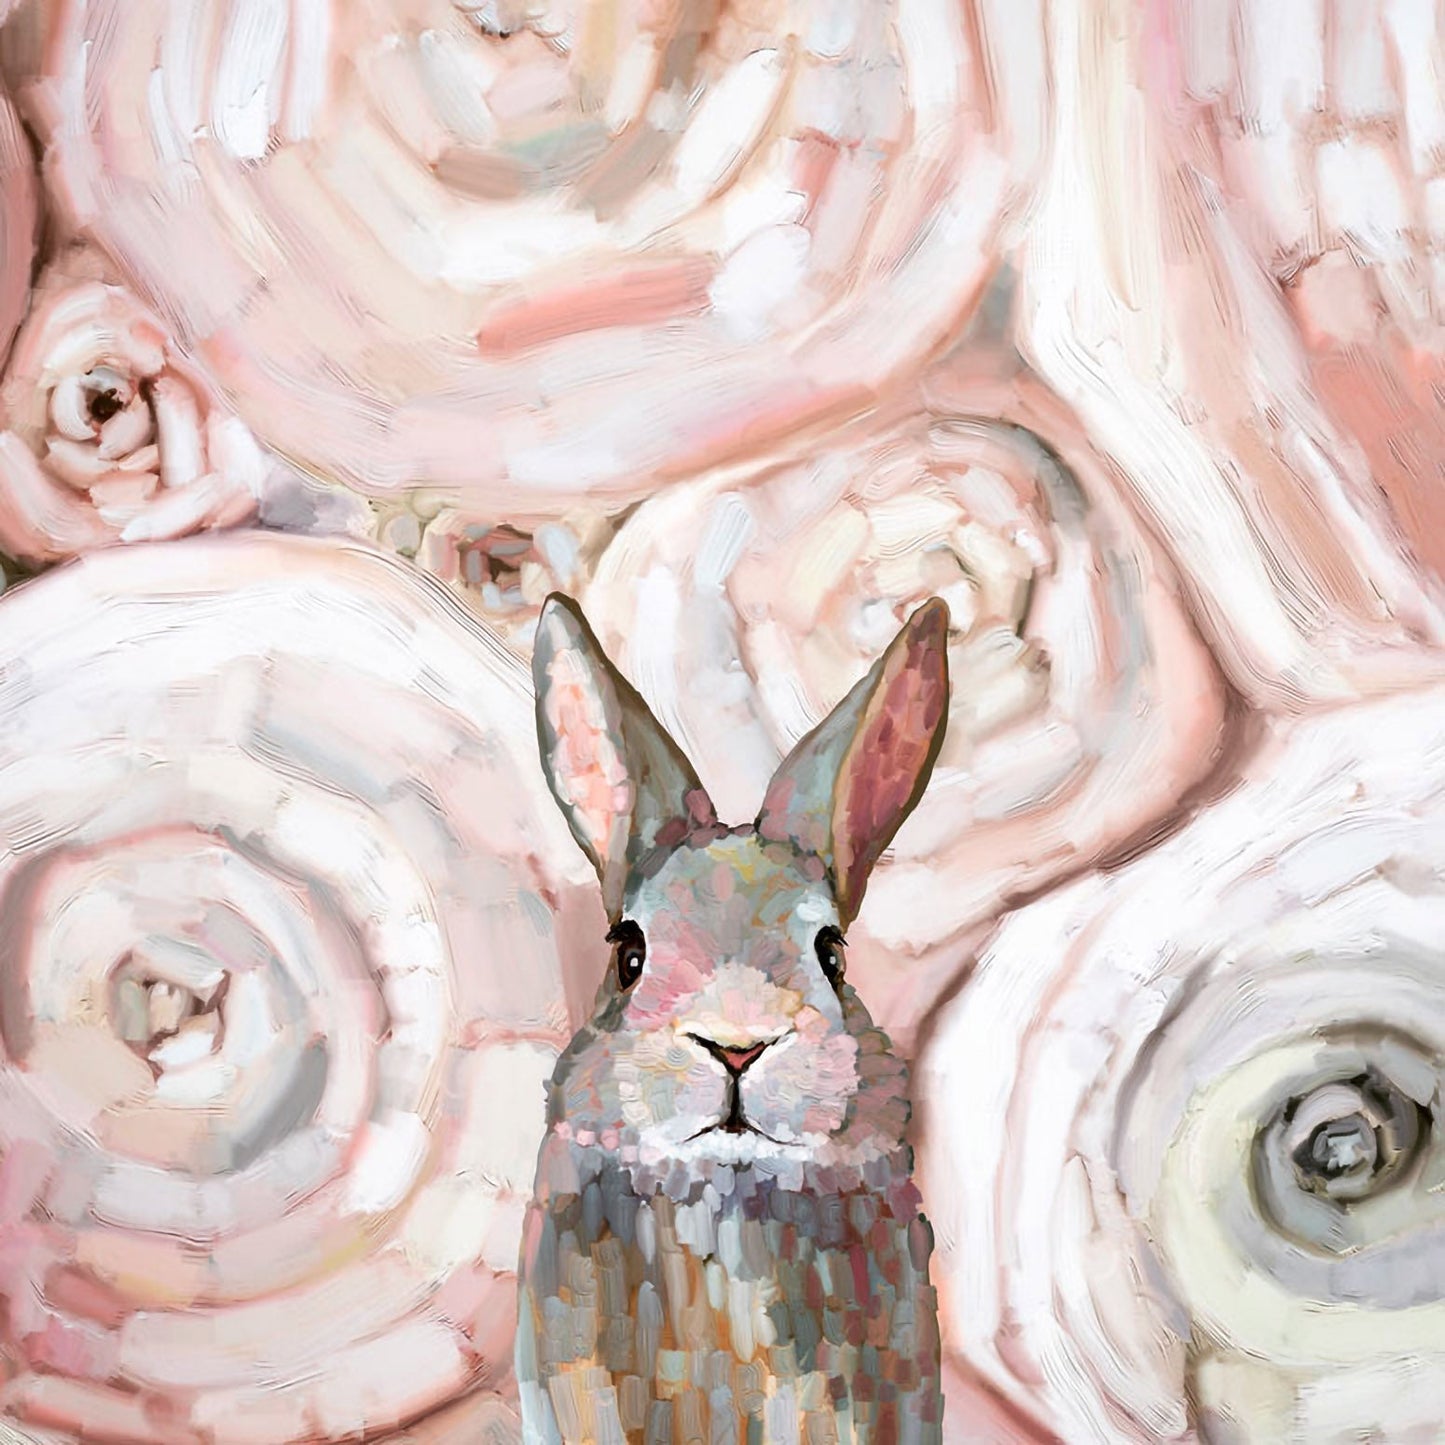 Bunny Of Roses Canvas Wall Art